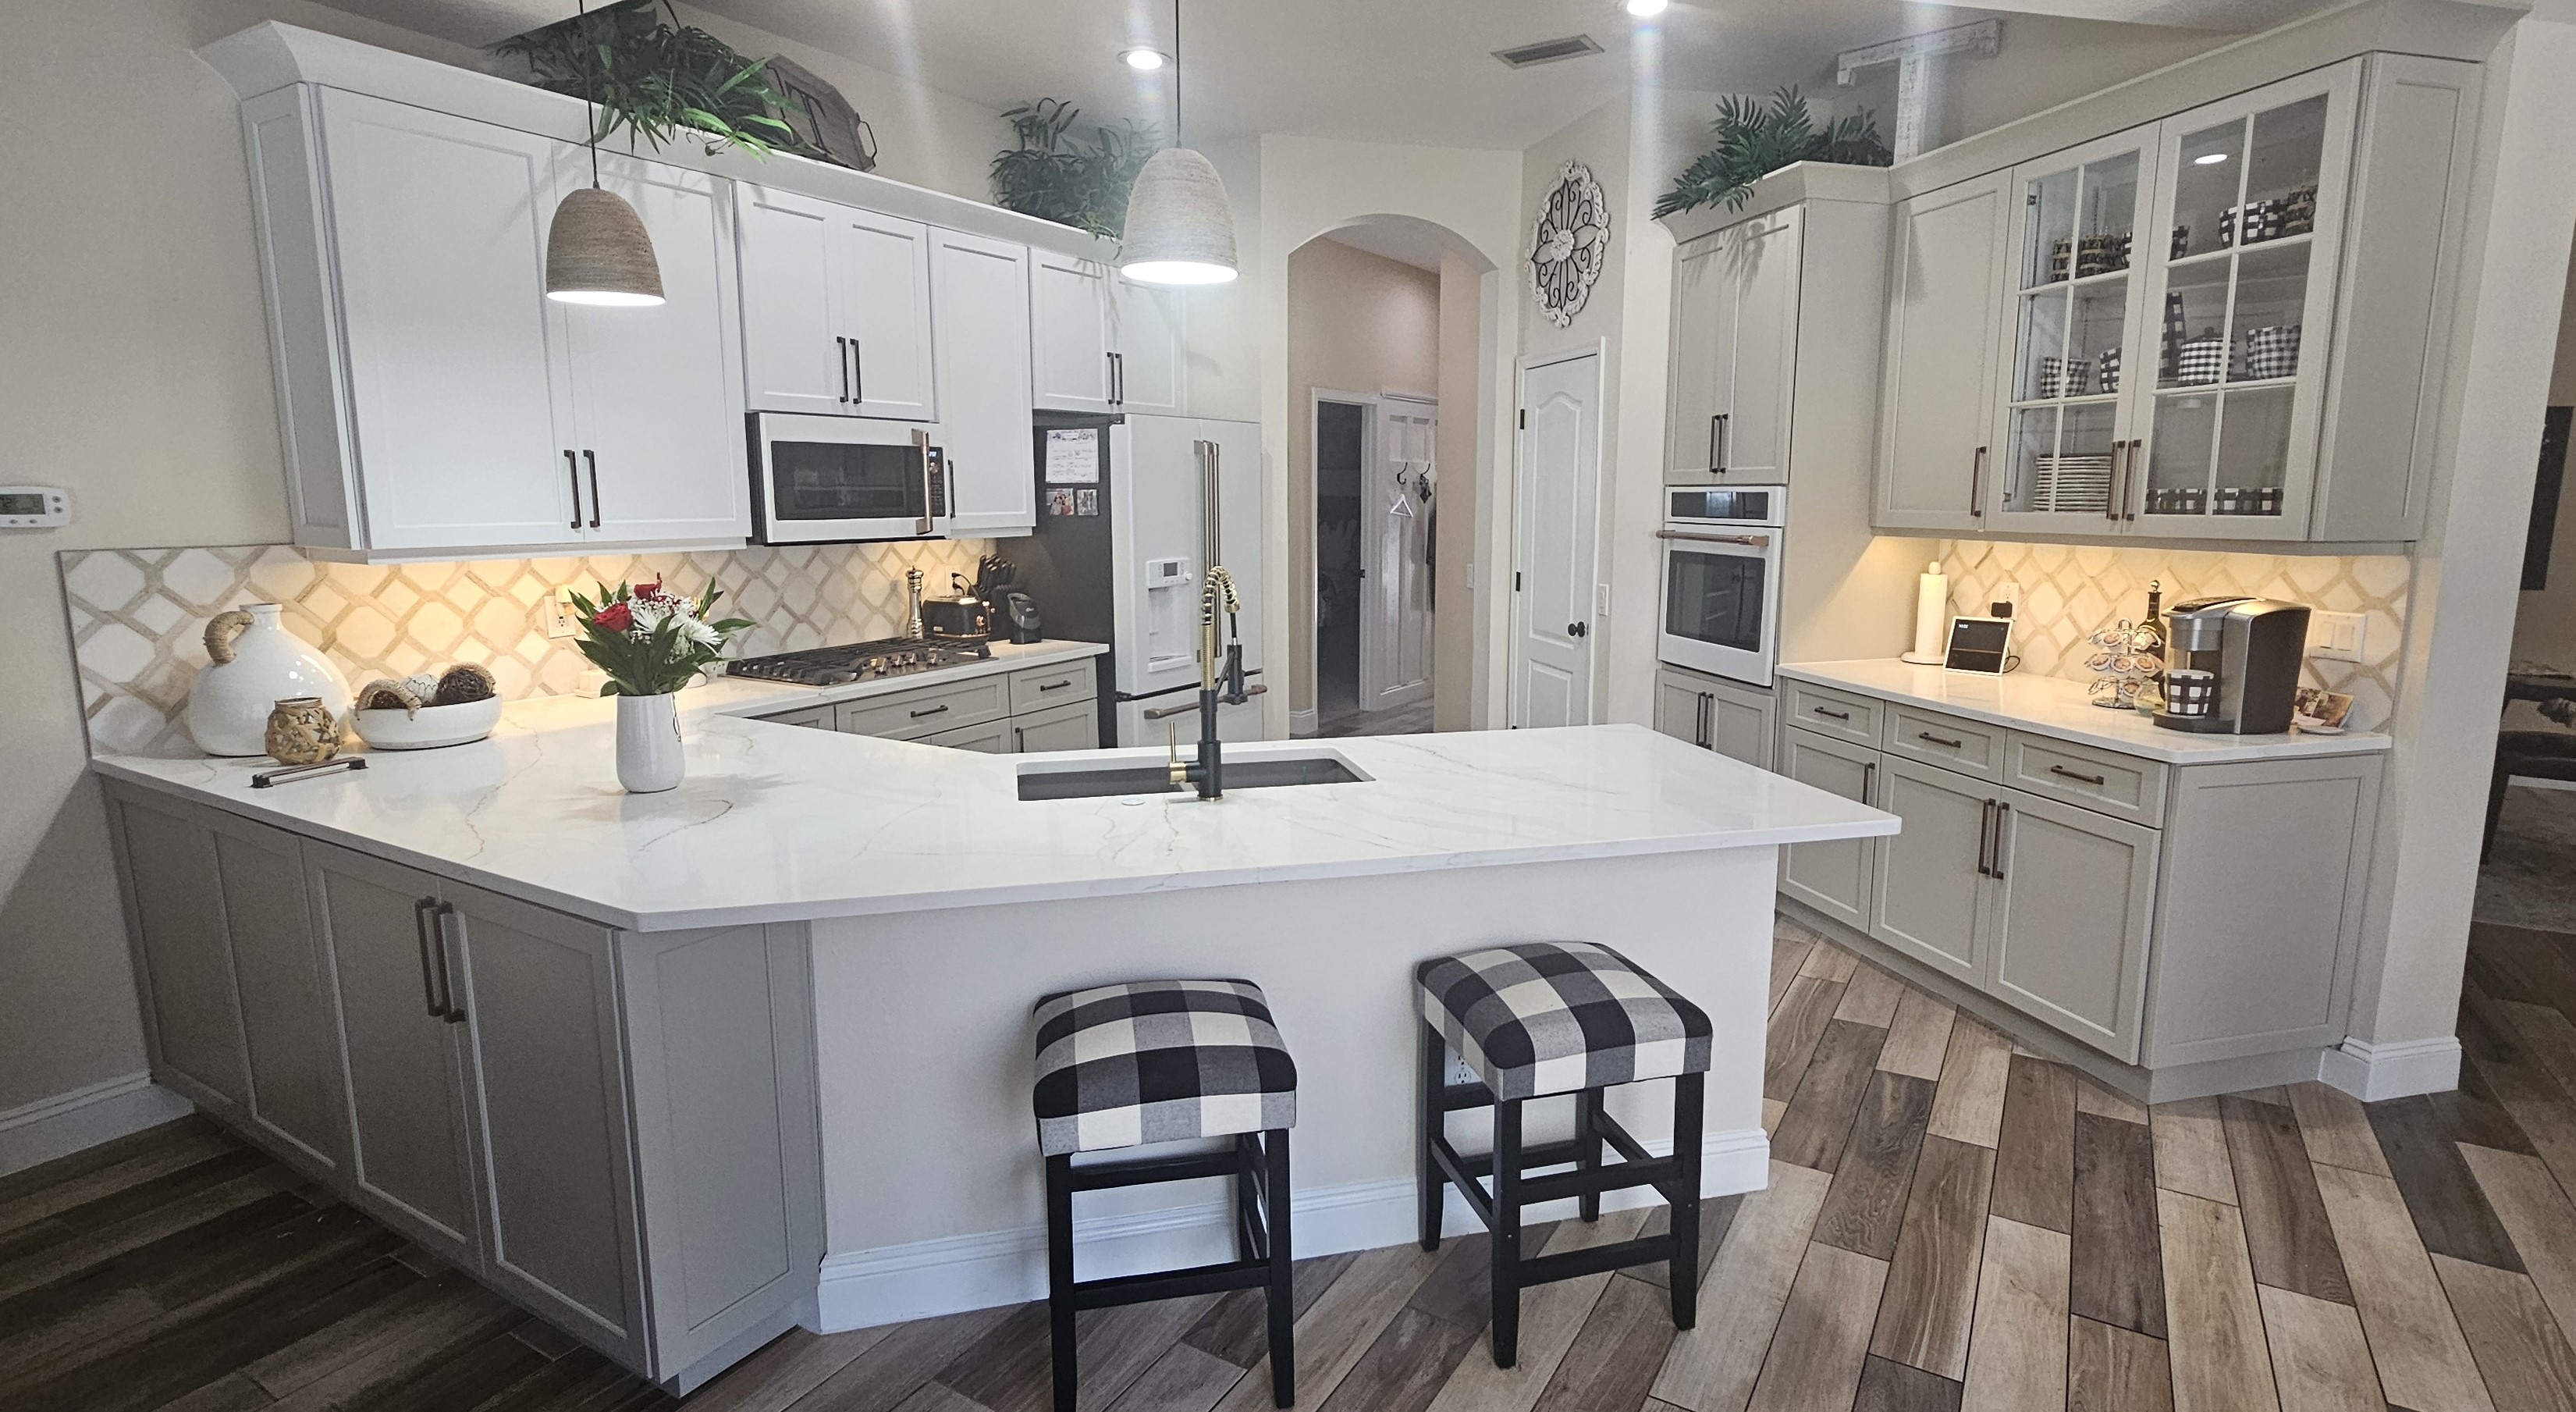 Modern appliances with a high-quality finish, granite worktops, and sleek white kitchen cabinets in Redington Shores.